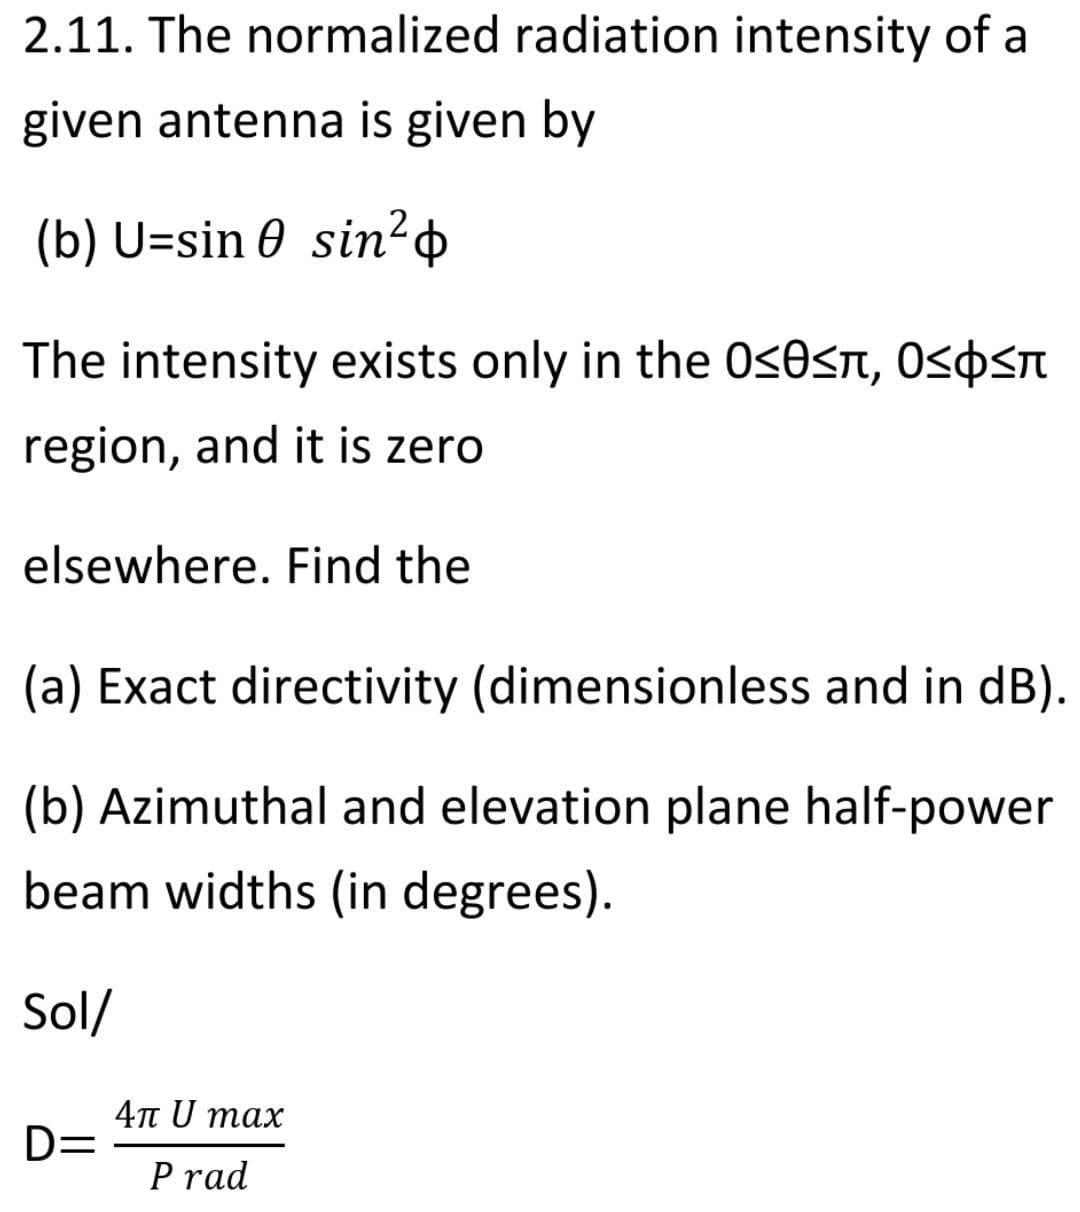 2.11. The normalized radiation intensity of a
given antenna is given by
(b) U=sin 0 sin²+
The intensity exists only in the 0<0sn, Ospsn
region, and it is zero
elsewhere. Find the
(a) Exact directivity (dimensionless and in dB).
(b) Azimuthal and elevation plane half-power
beam widths (in degrees).
Sol/
4n U max
D=
P rad
